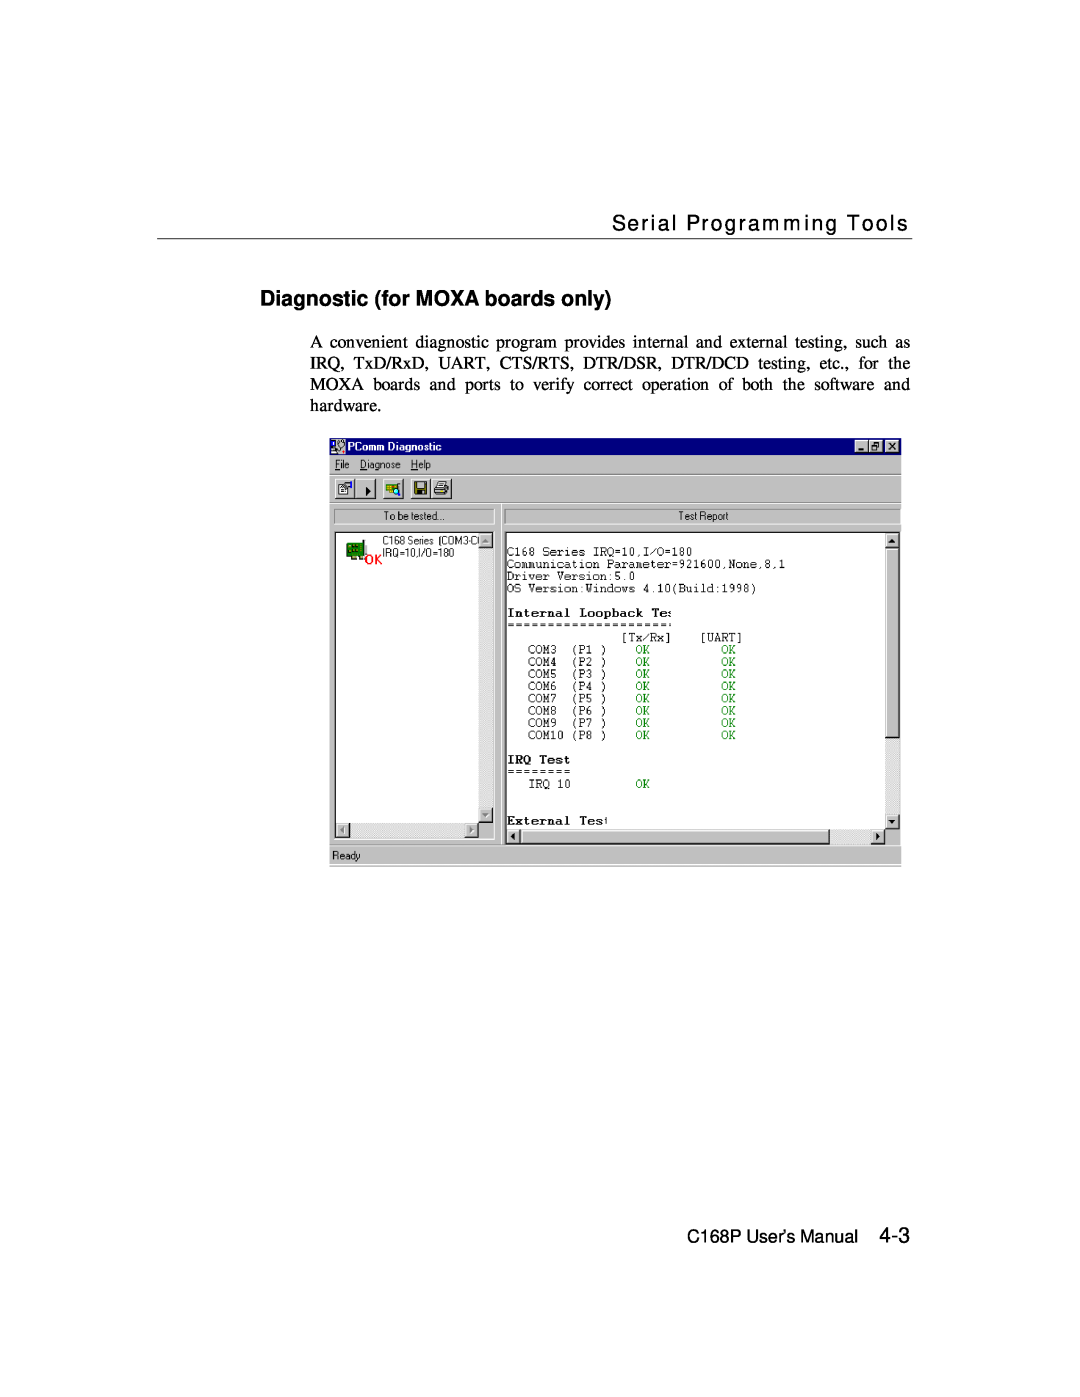 Moxa Technologies user manual Diagnostic for MOXA boards only, Serial Programming Tools, C168P User’s Manual 